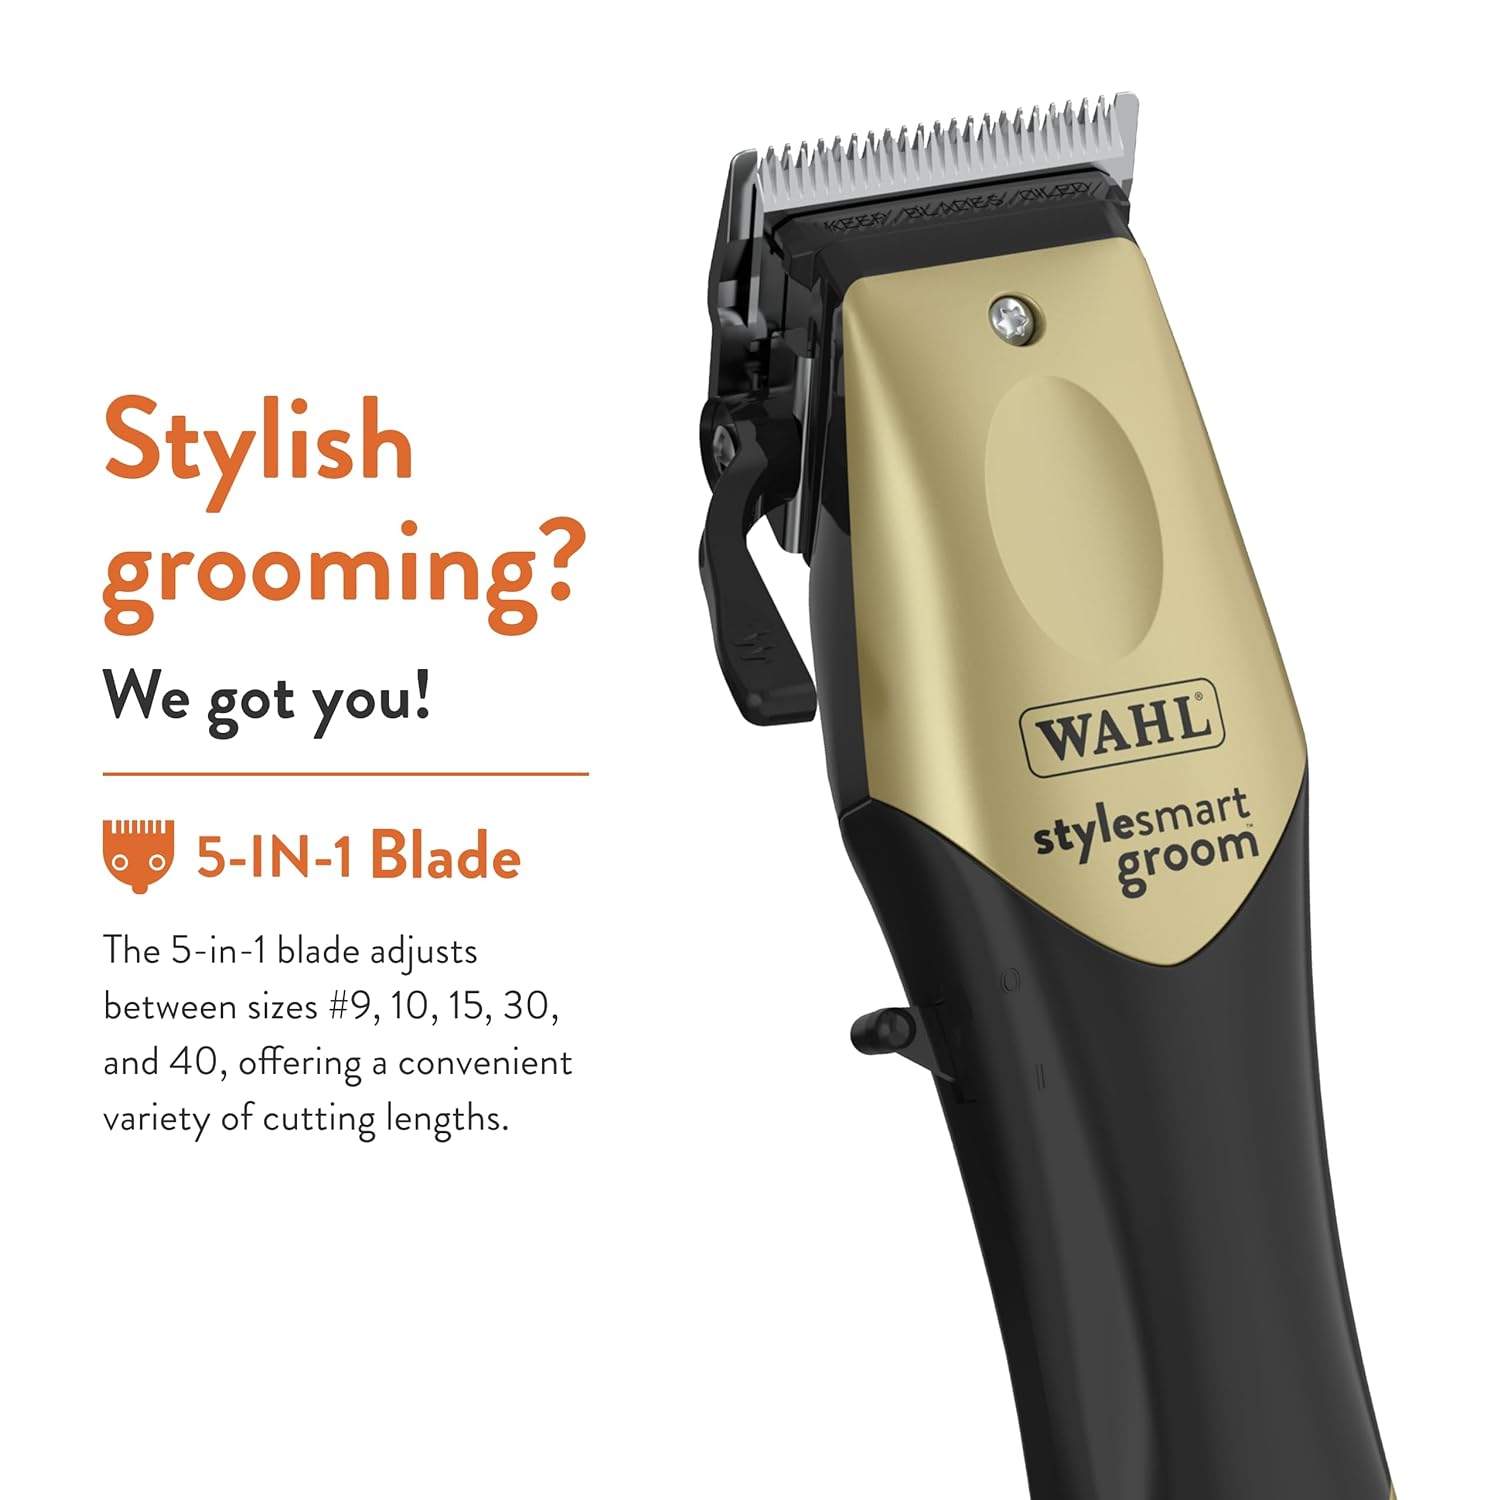 WAHL Professional Animal StyleSmart Cordless Clipper Kit for Pet, Dog & Cat Grooming (#70007) - Dog, Cat & Horse Grooming Supplies - Pet Hair Trimmer - with Guide Combs & Blade - Gold